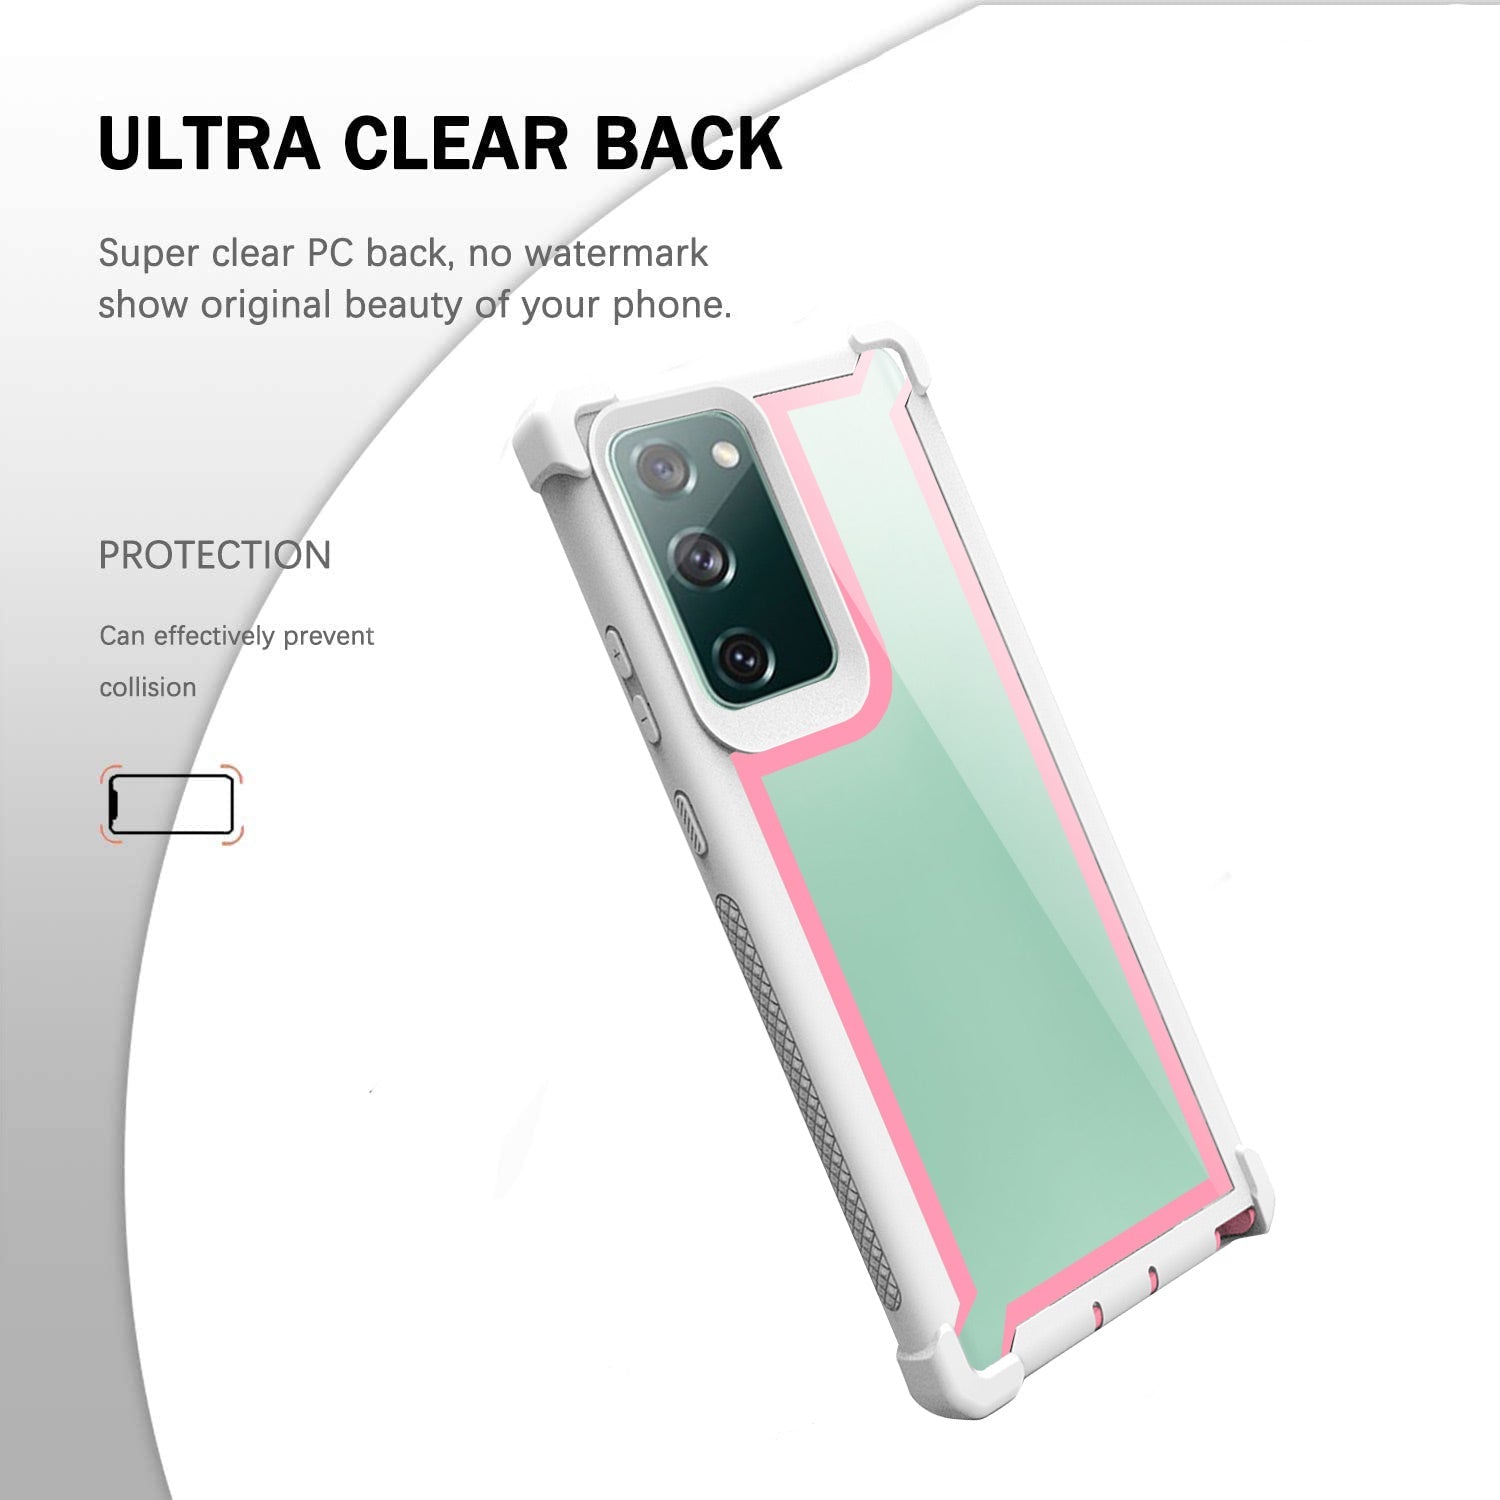 Caeouts Shockproof Protective Phone Case For Galaxy S20 Series